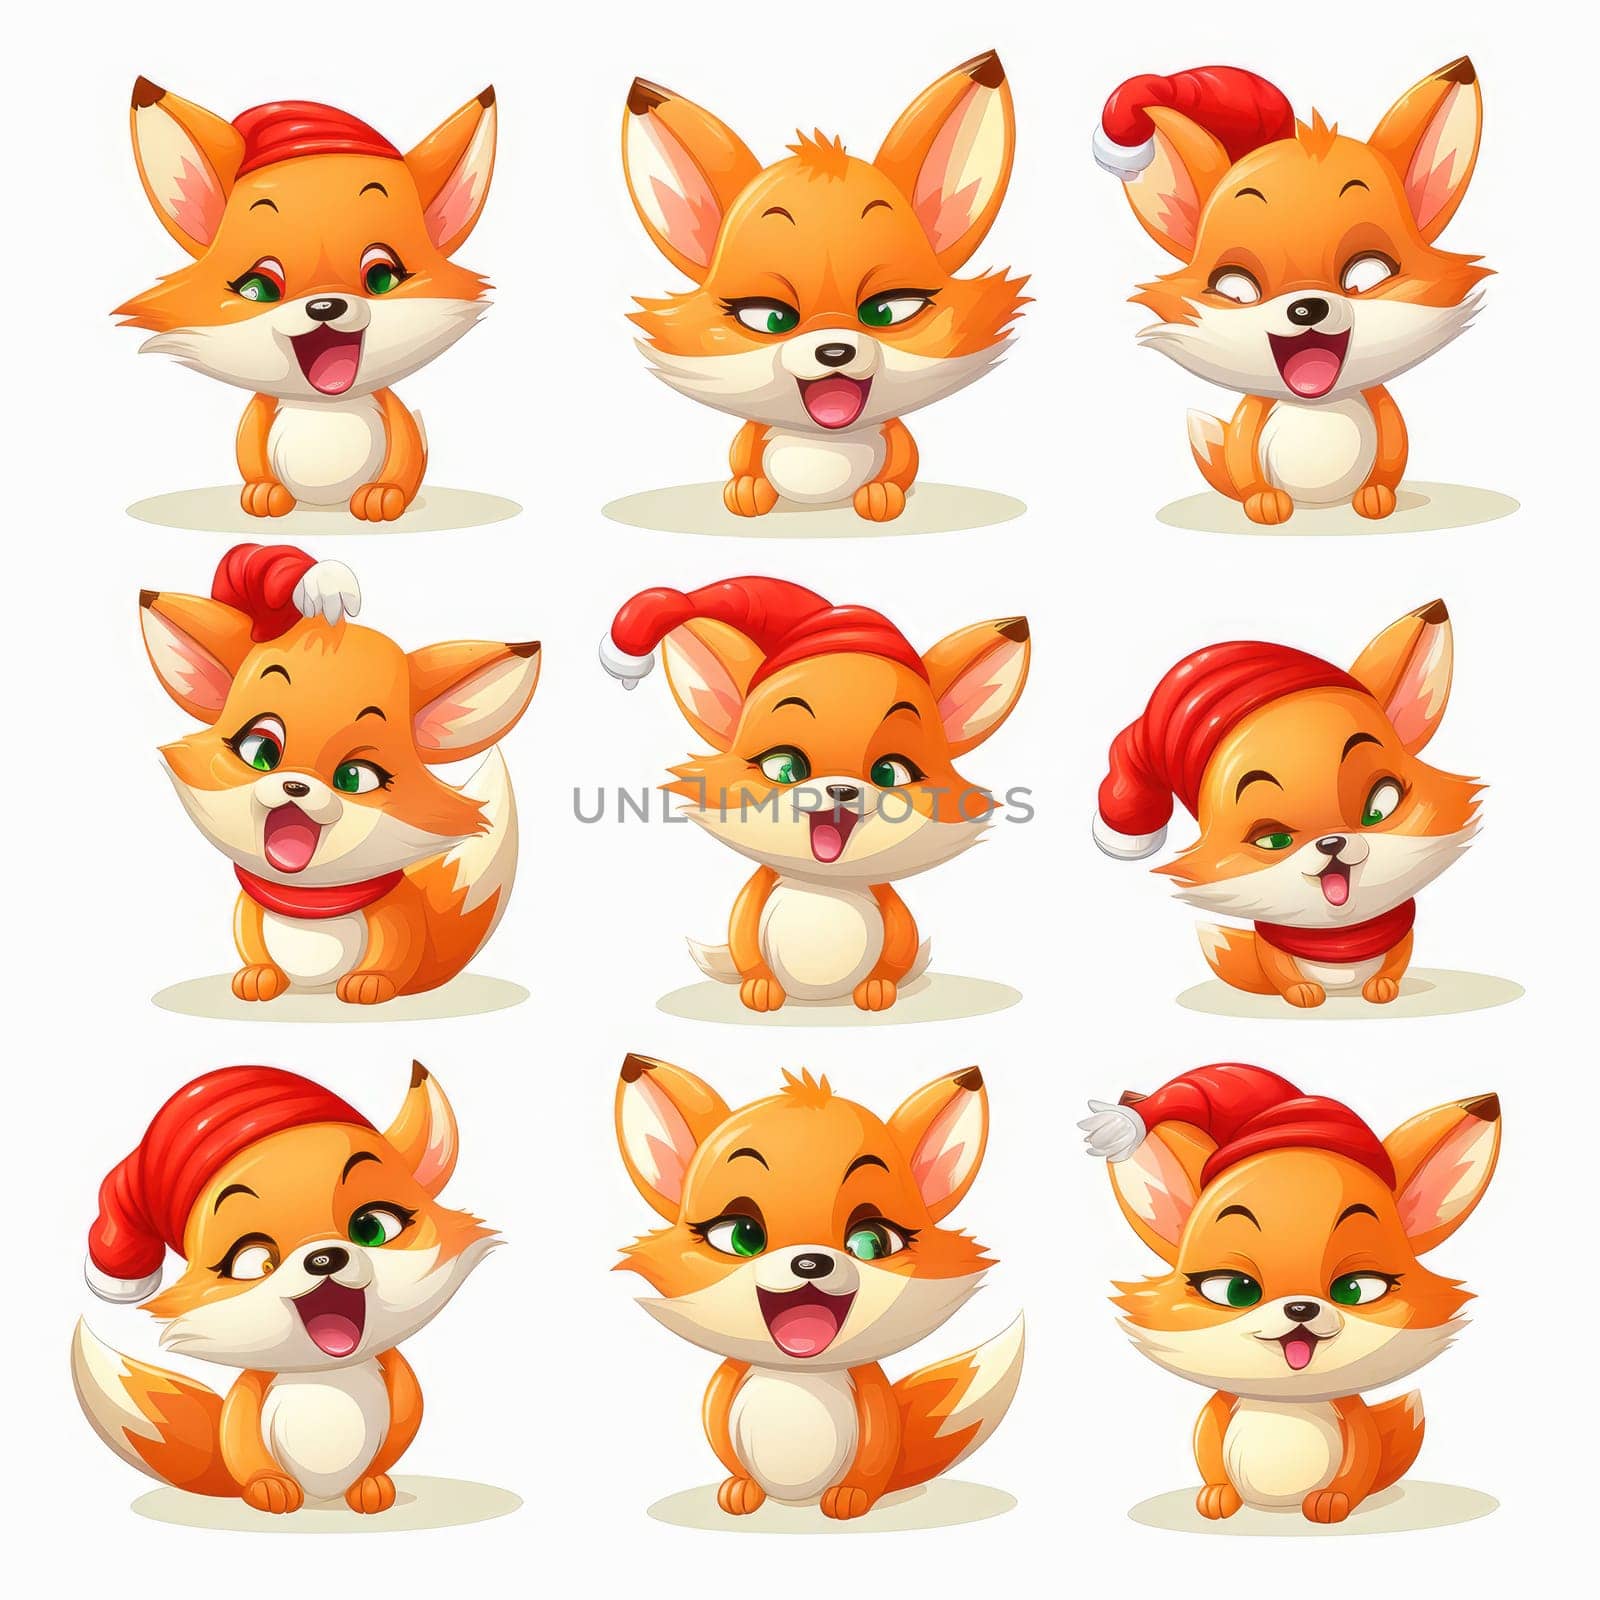 New Year emoticons funny foxes emoji. Cartoon style, New Year, Christmas. by Yurich32